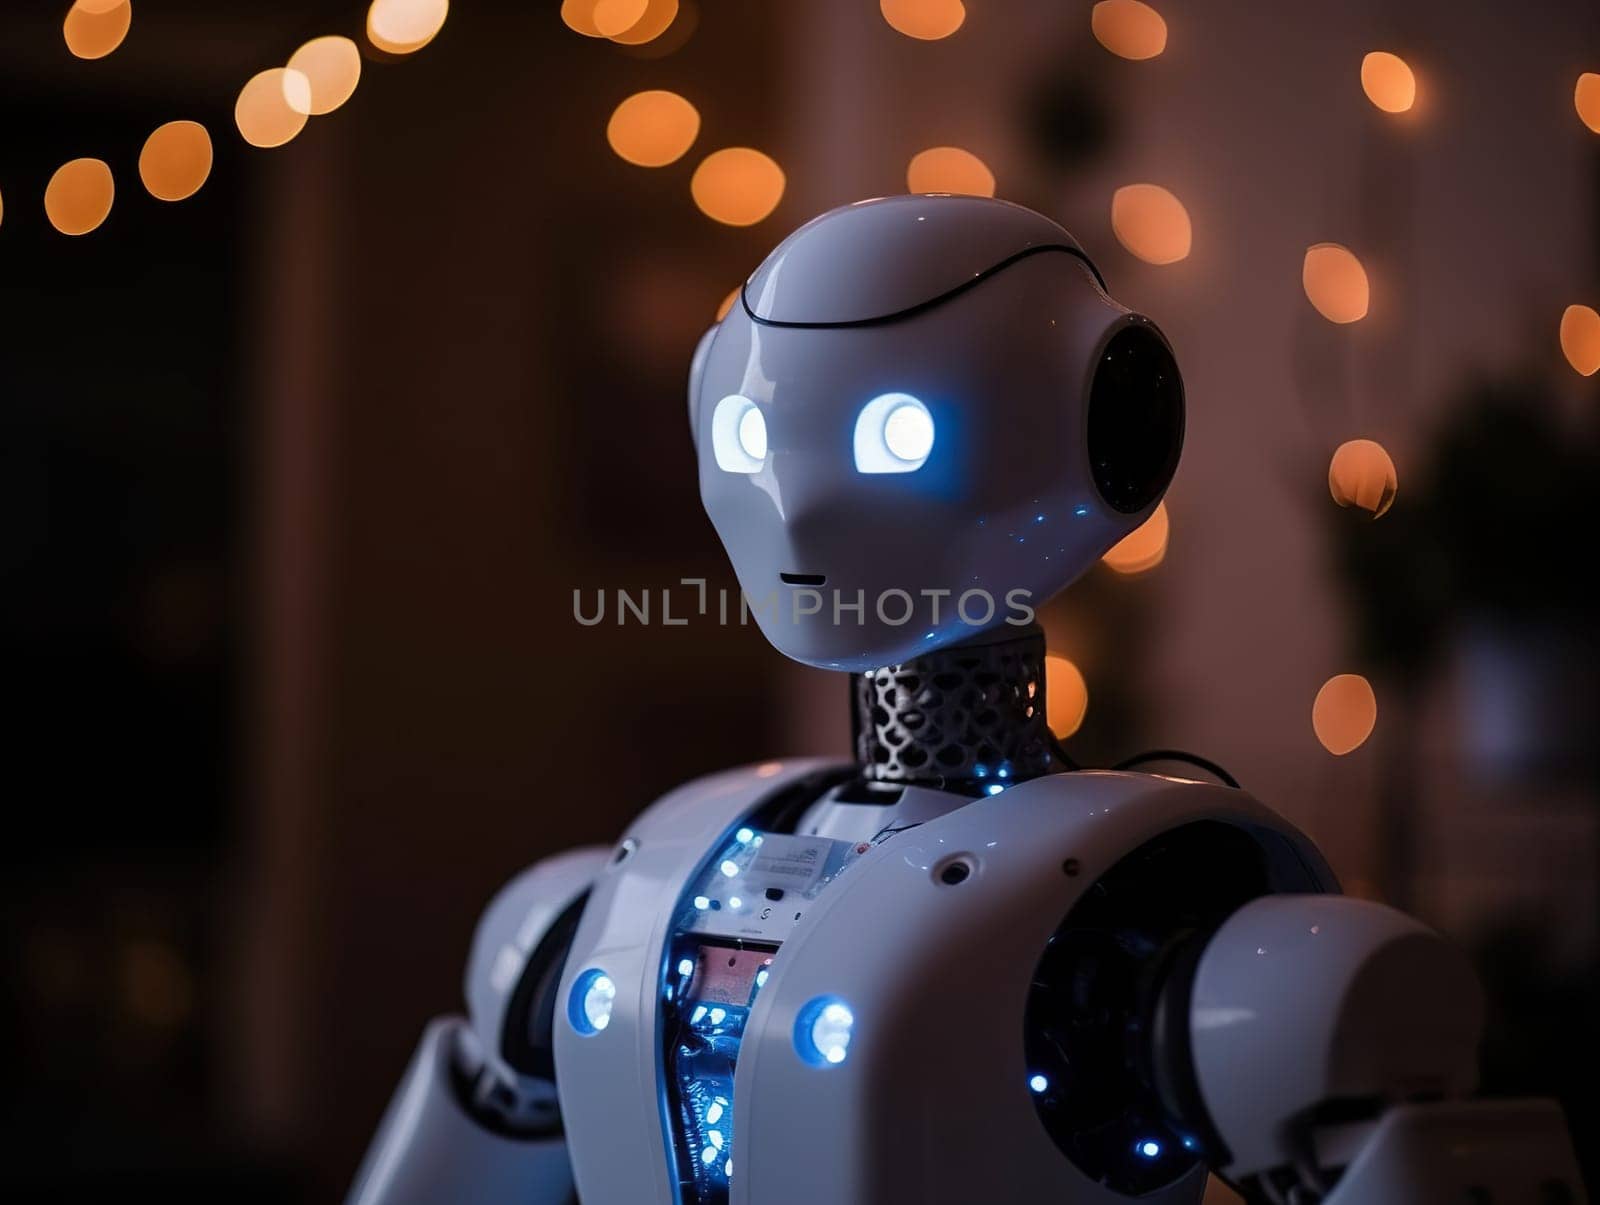 Android Robot Against A Christmas Backdrop